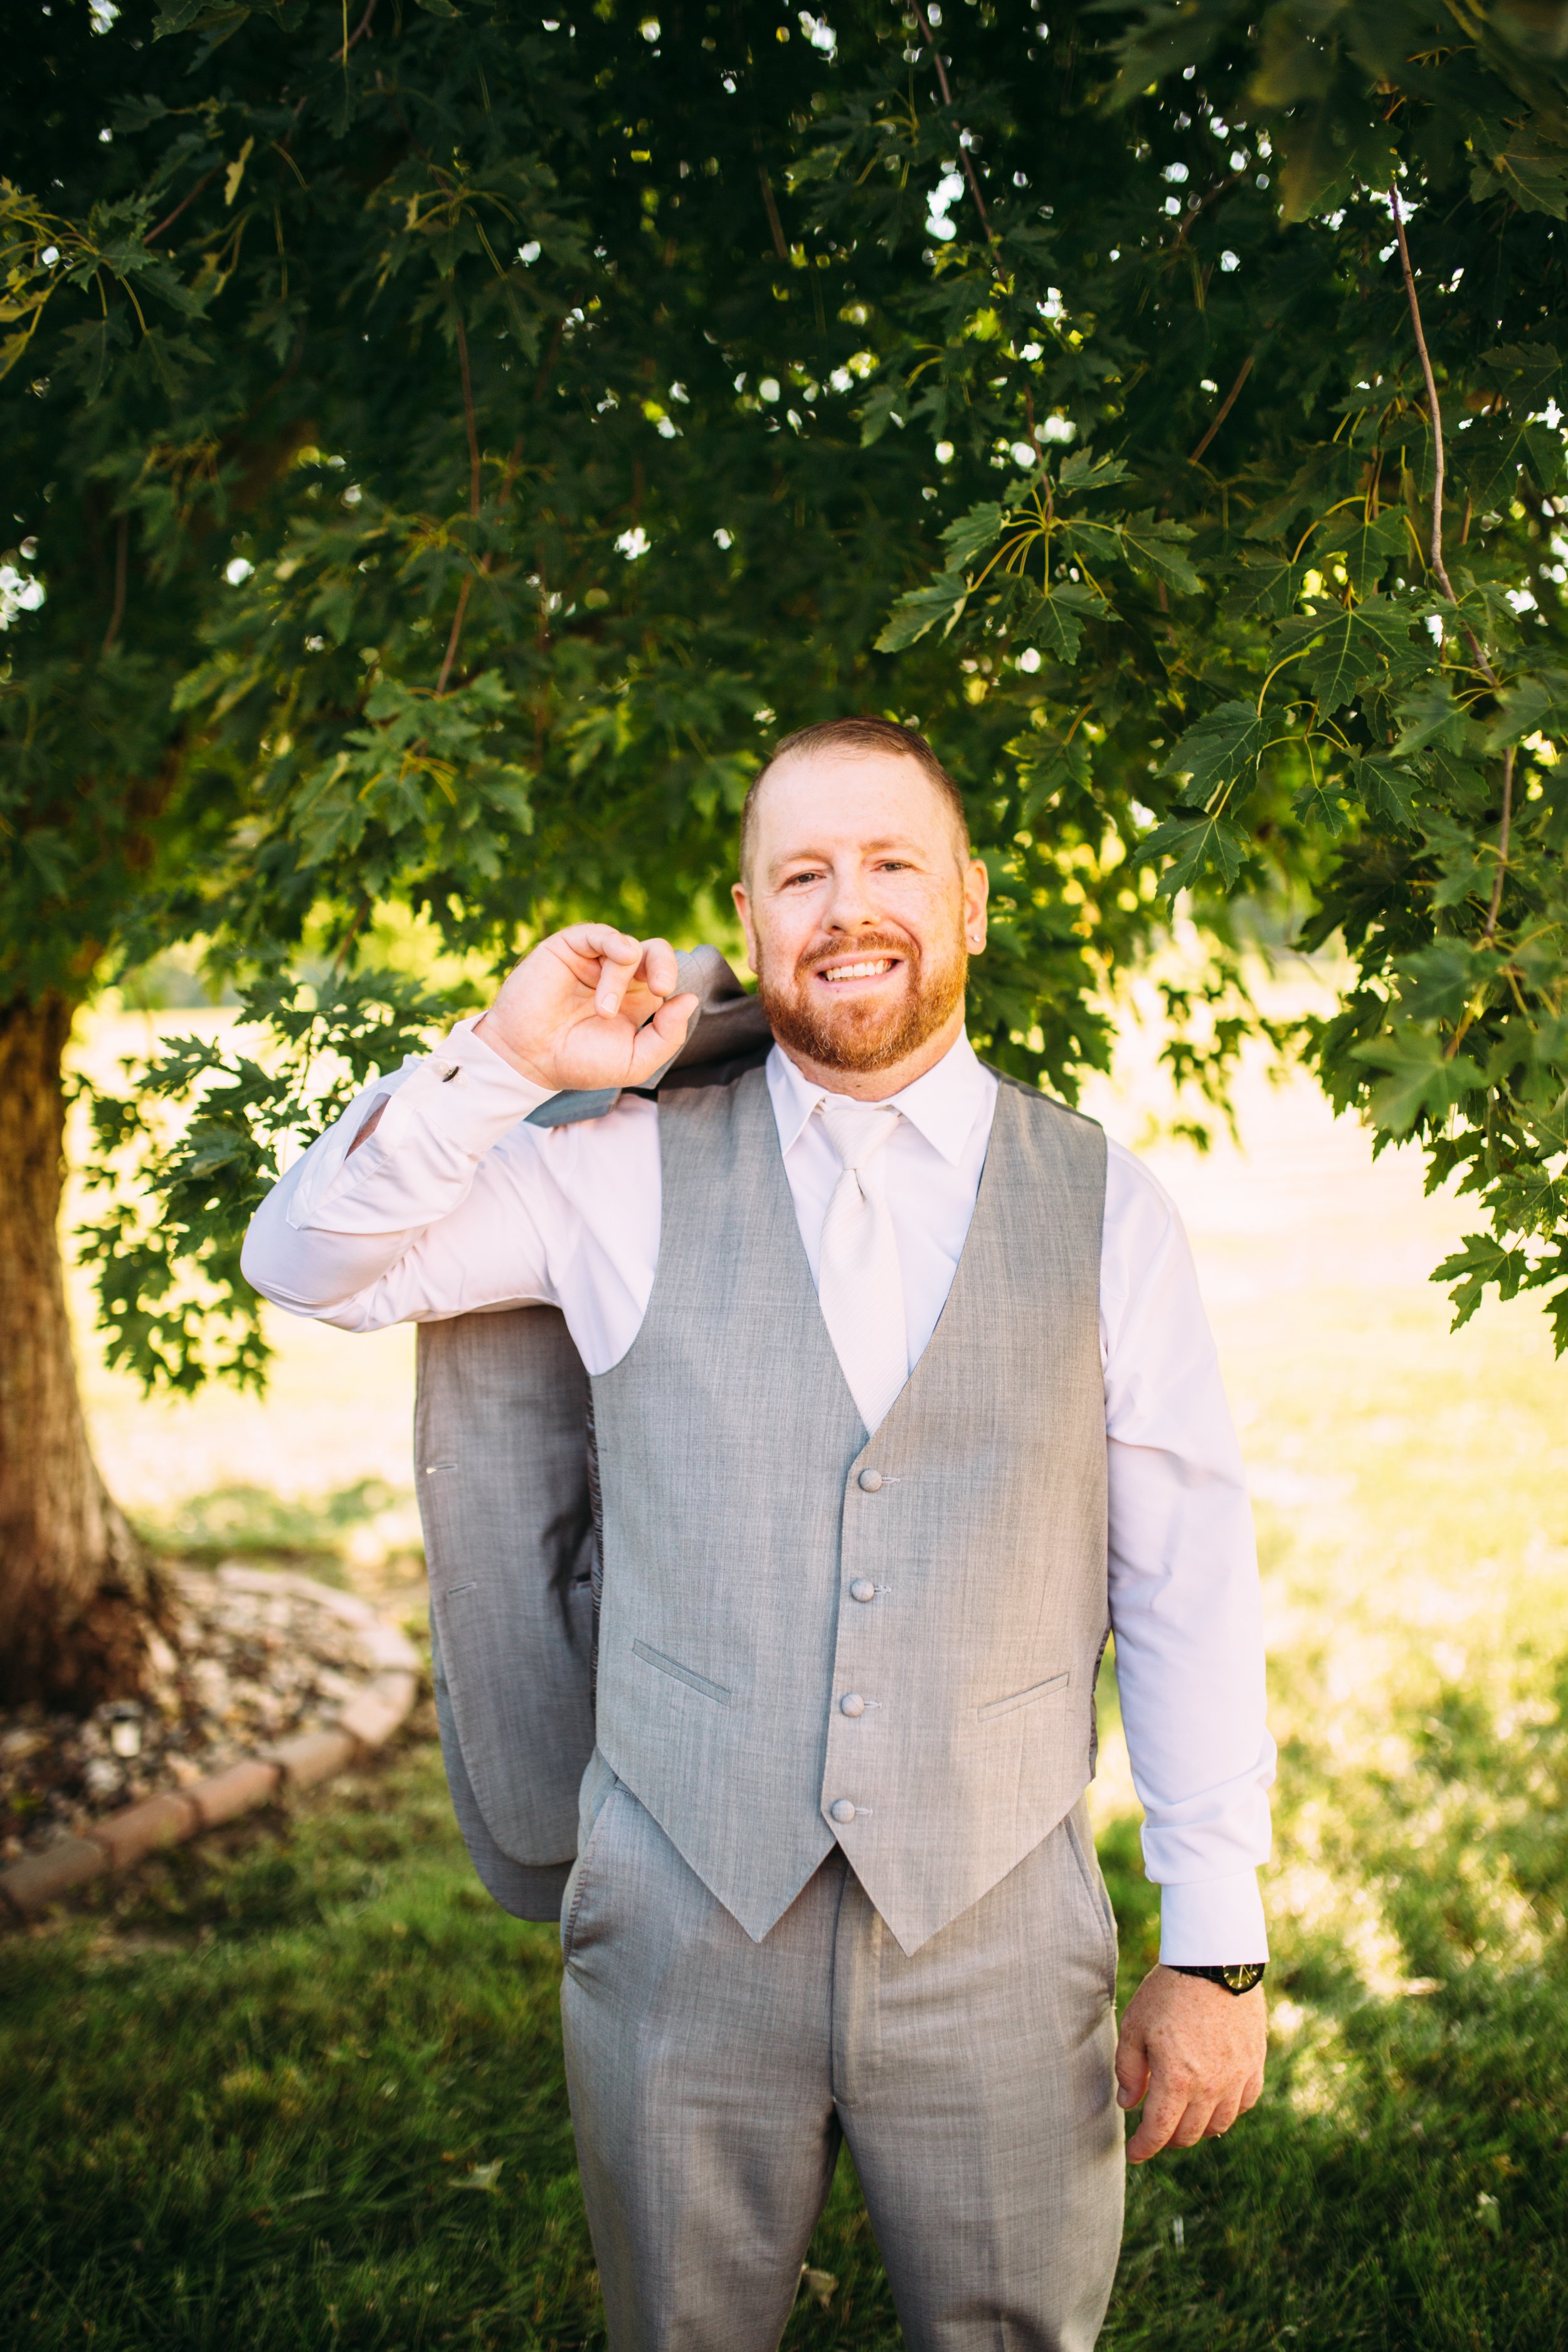  Teala Ward Photography captures a portrait of the groom in a gray three-piece suit on his wedding day. groom style groom portrait #TealaWardPhotography #IllinoisValleyPhotographer #summerwedding #TealaWardWeddings #Illinoisweddings  